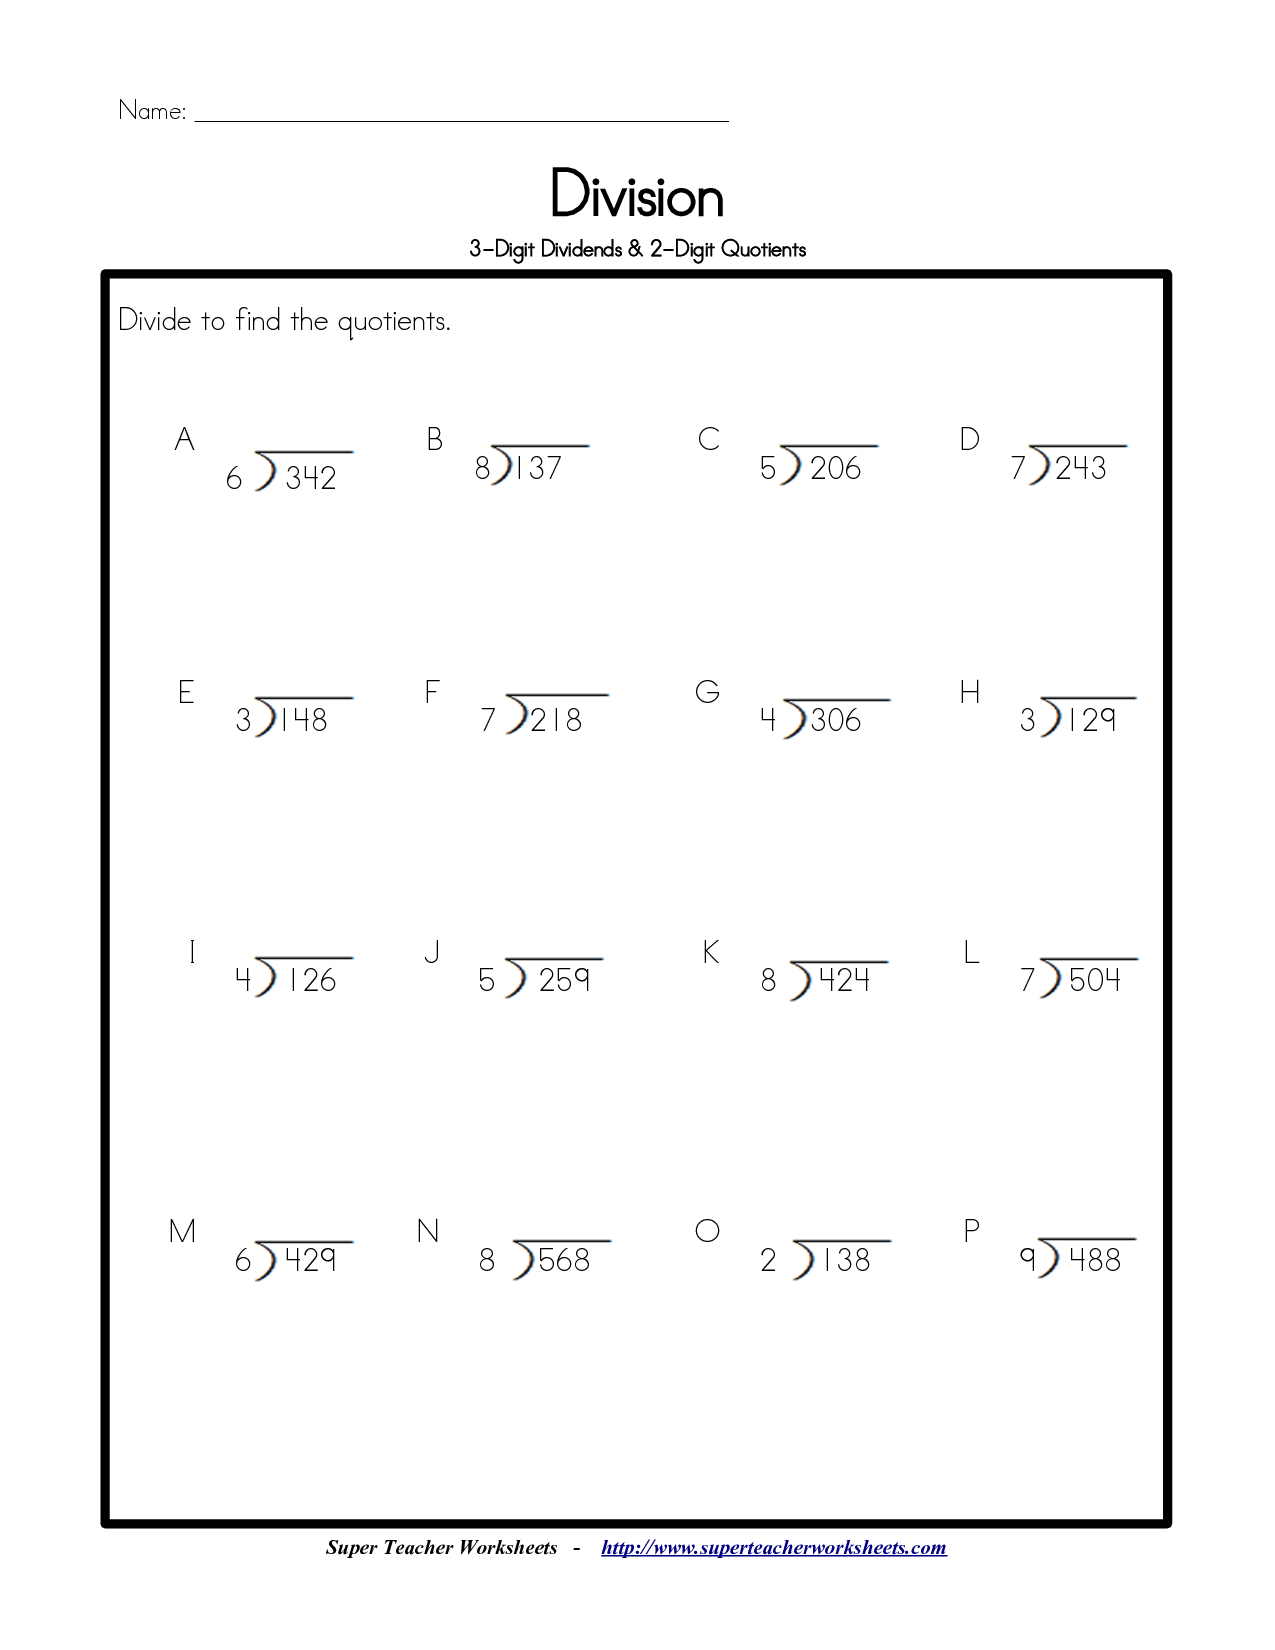 Sheet Printable Images Gallery Category Page 16 Printablee